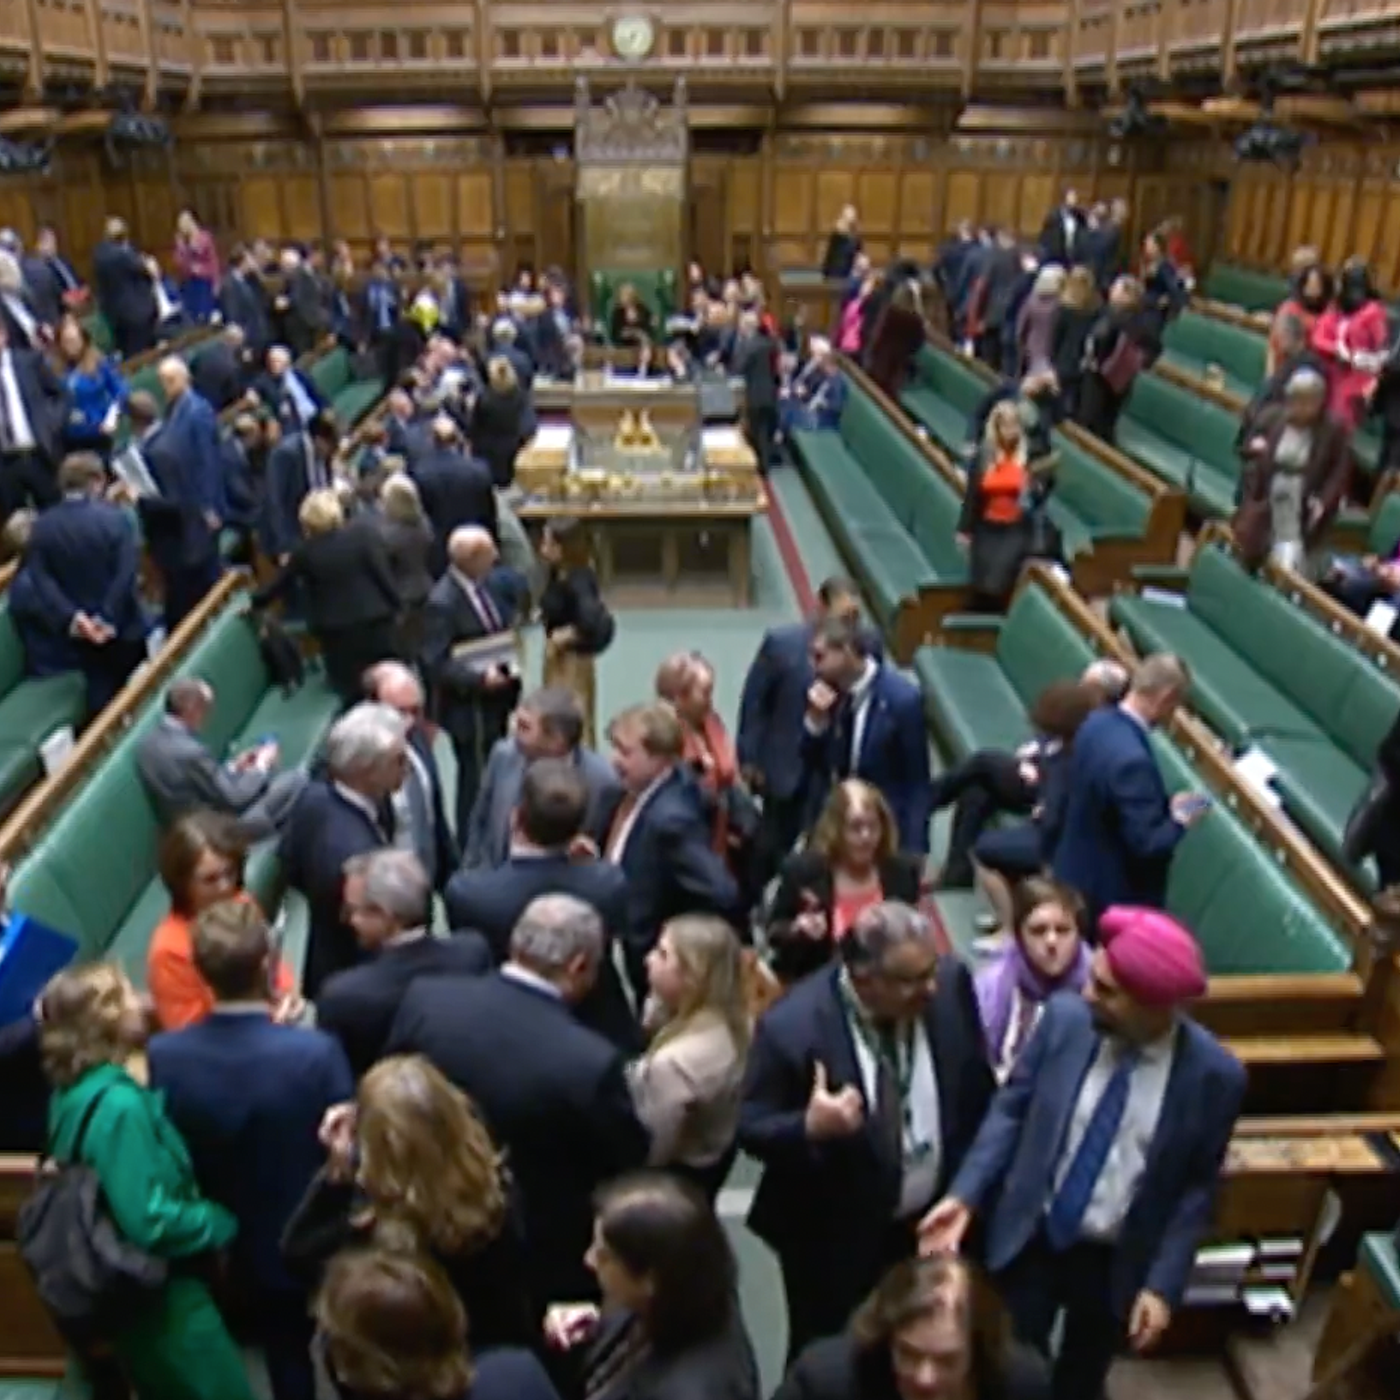 What happened in the Commons chaos last night?